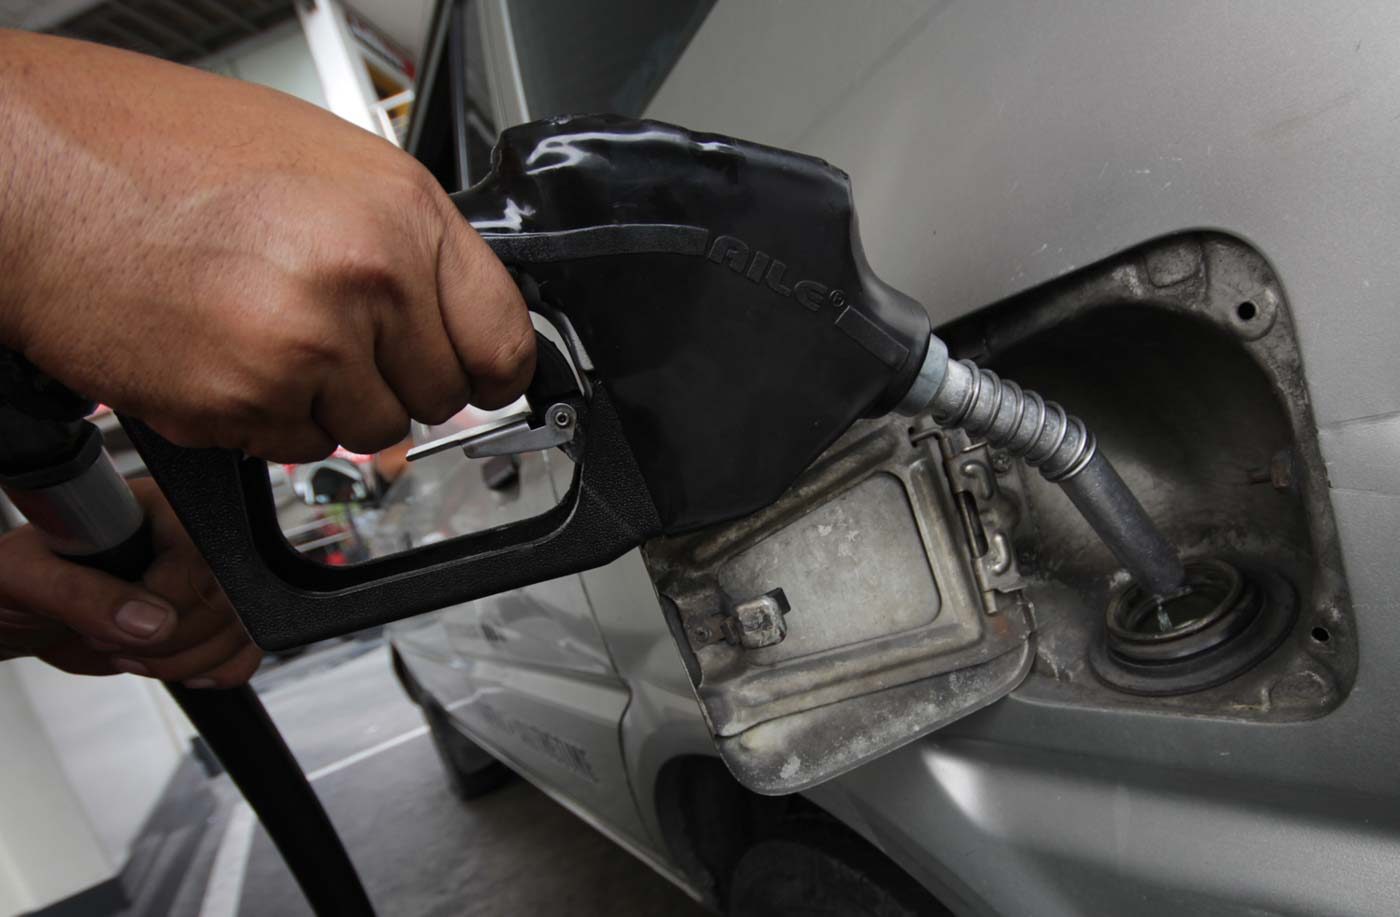 Gasoline prices to jump by over P1 on September 17